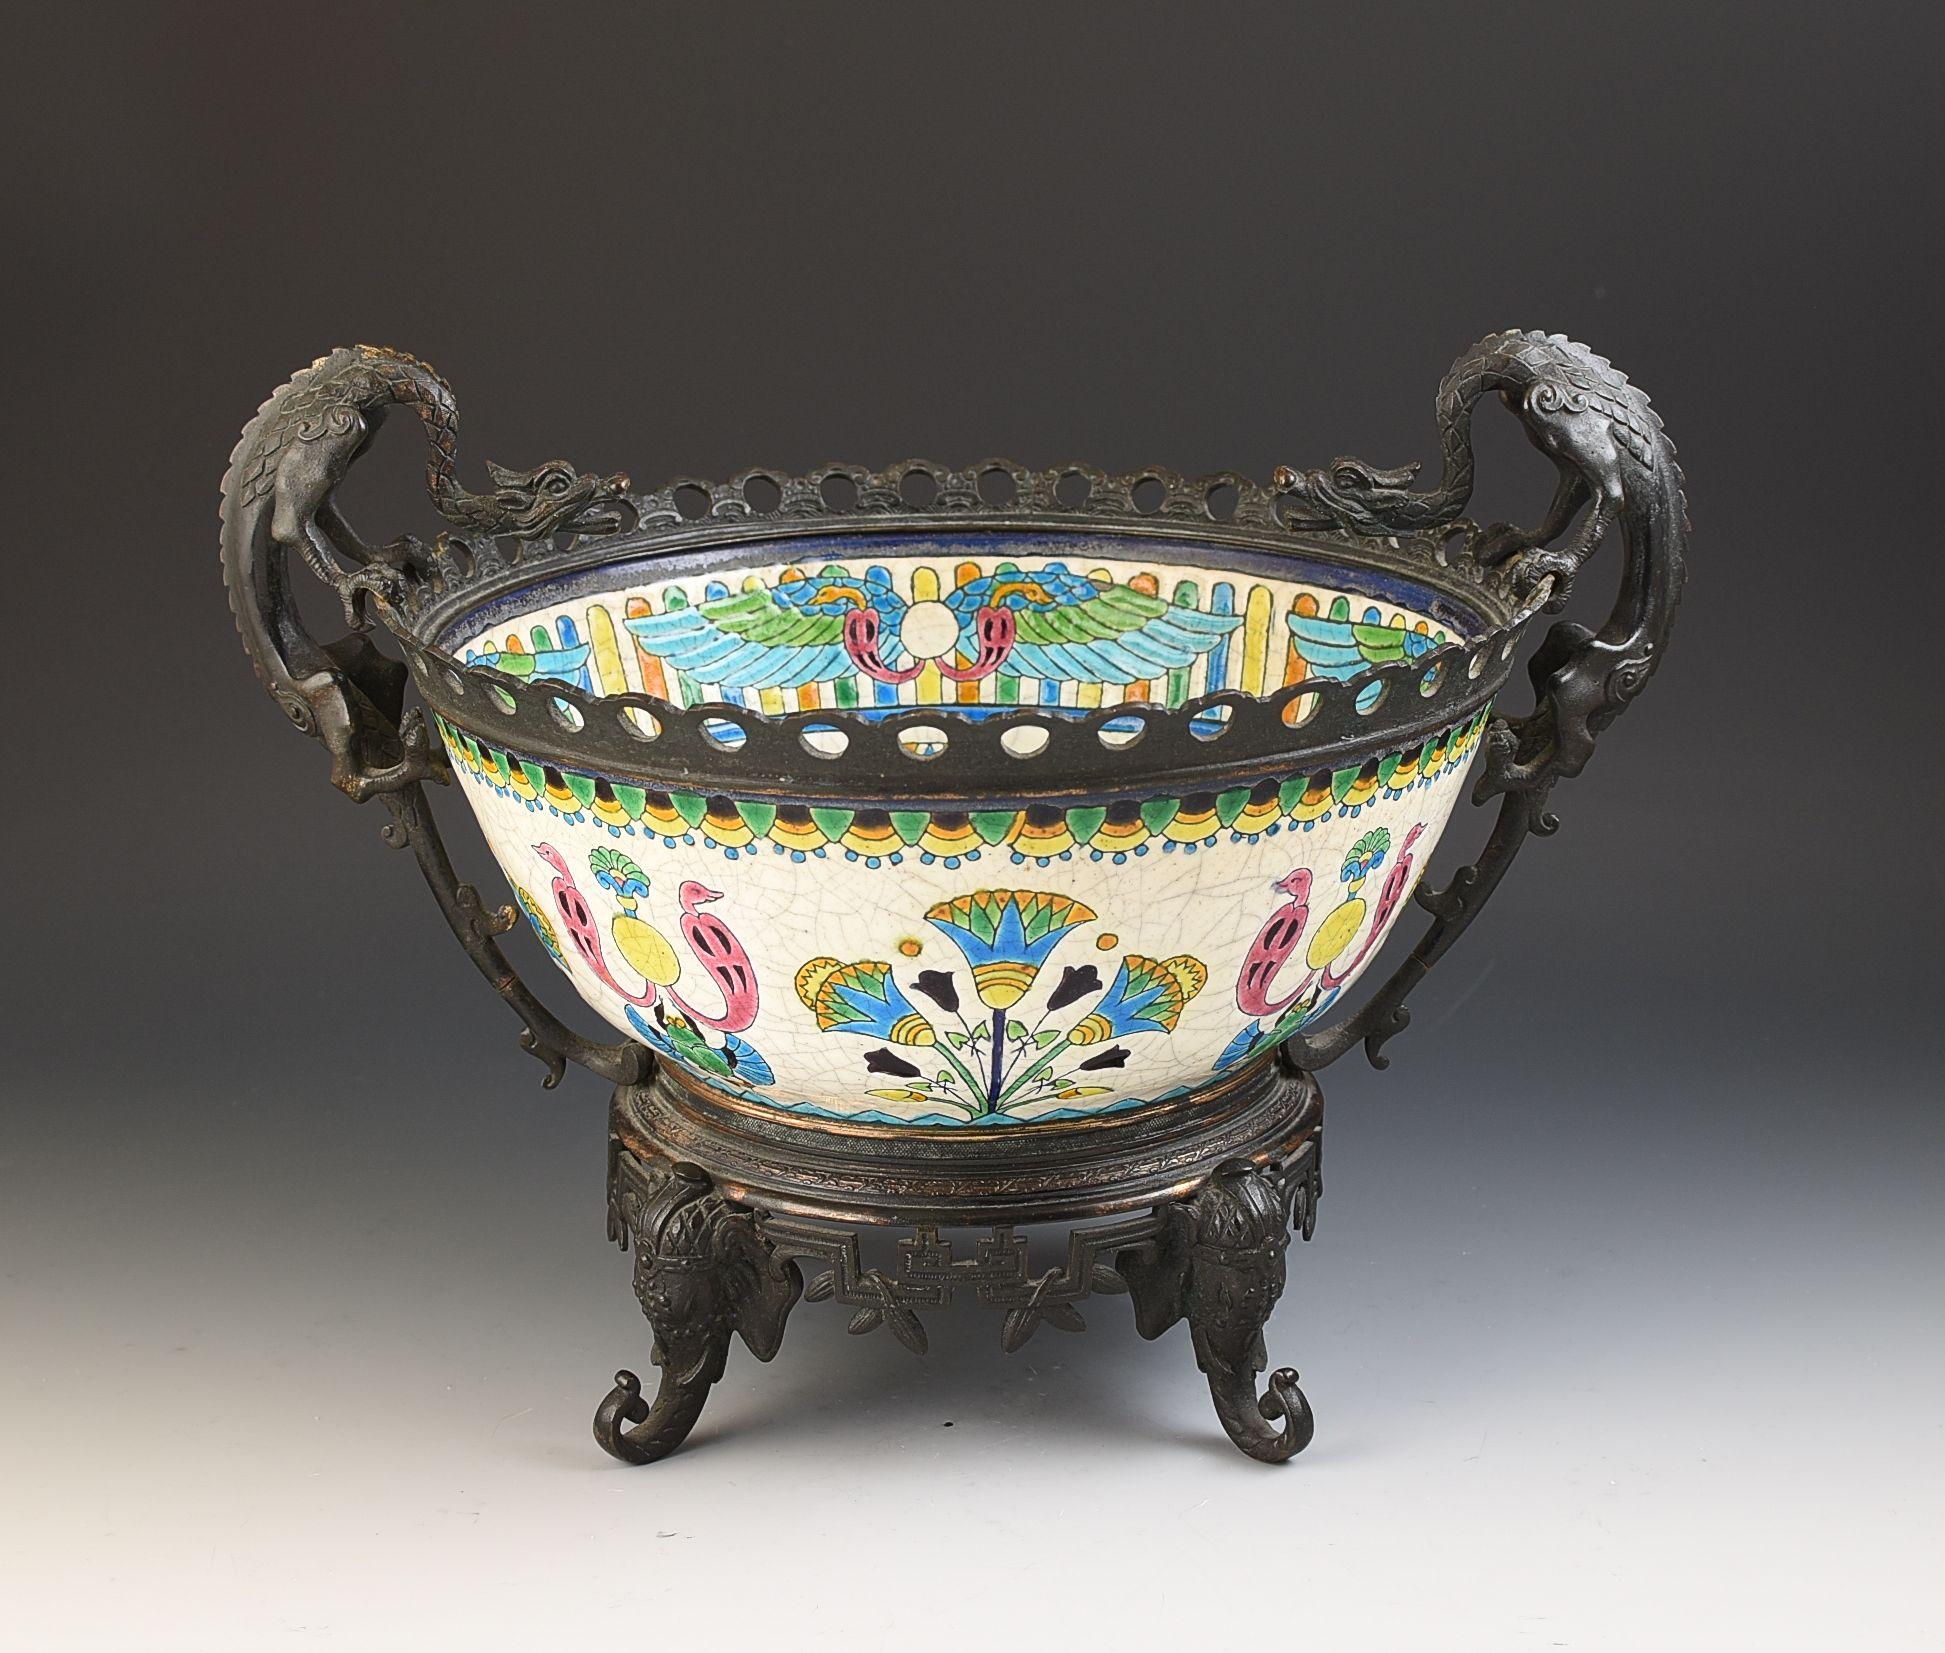 A superb bronze mounted Aethsetic movement decorative bowl dating to the 1880's by Longwy, France. The ceramic is beautifully decorated with the bronze mounts showing dragons as handles and elephants heads as feet. It measures 37cm wide, 1s 27cm